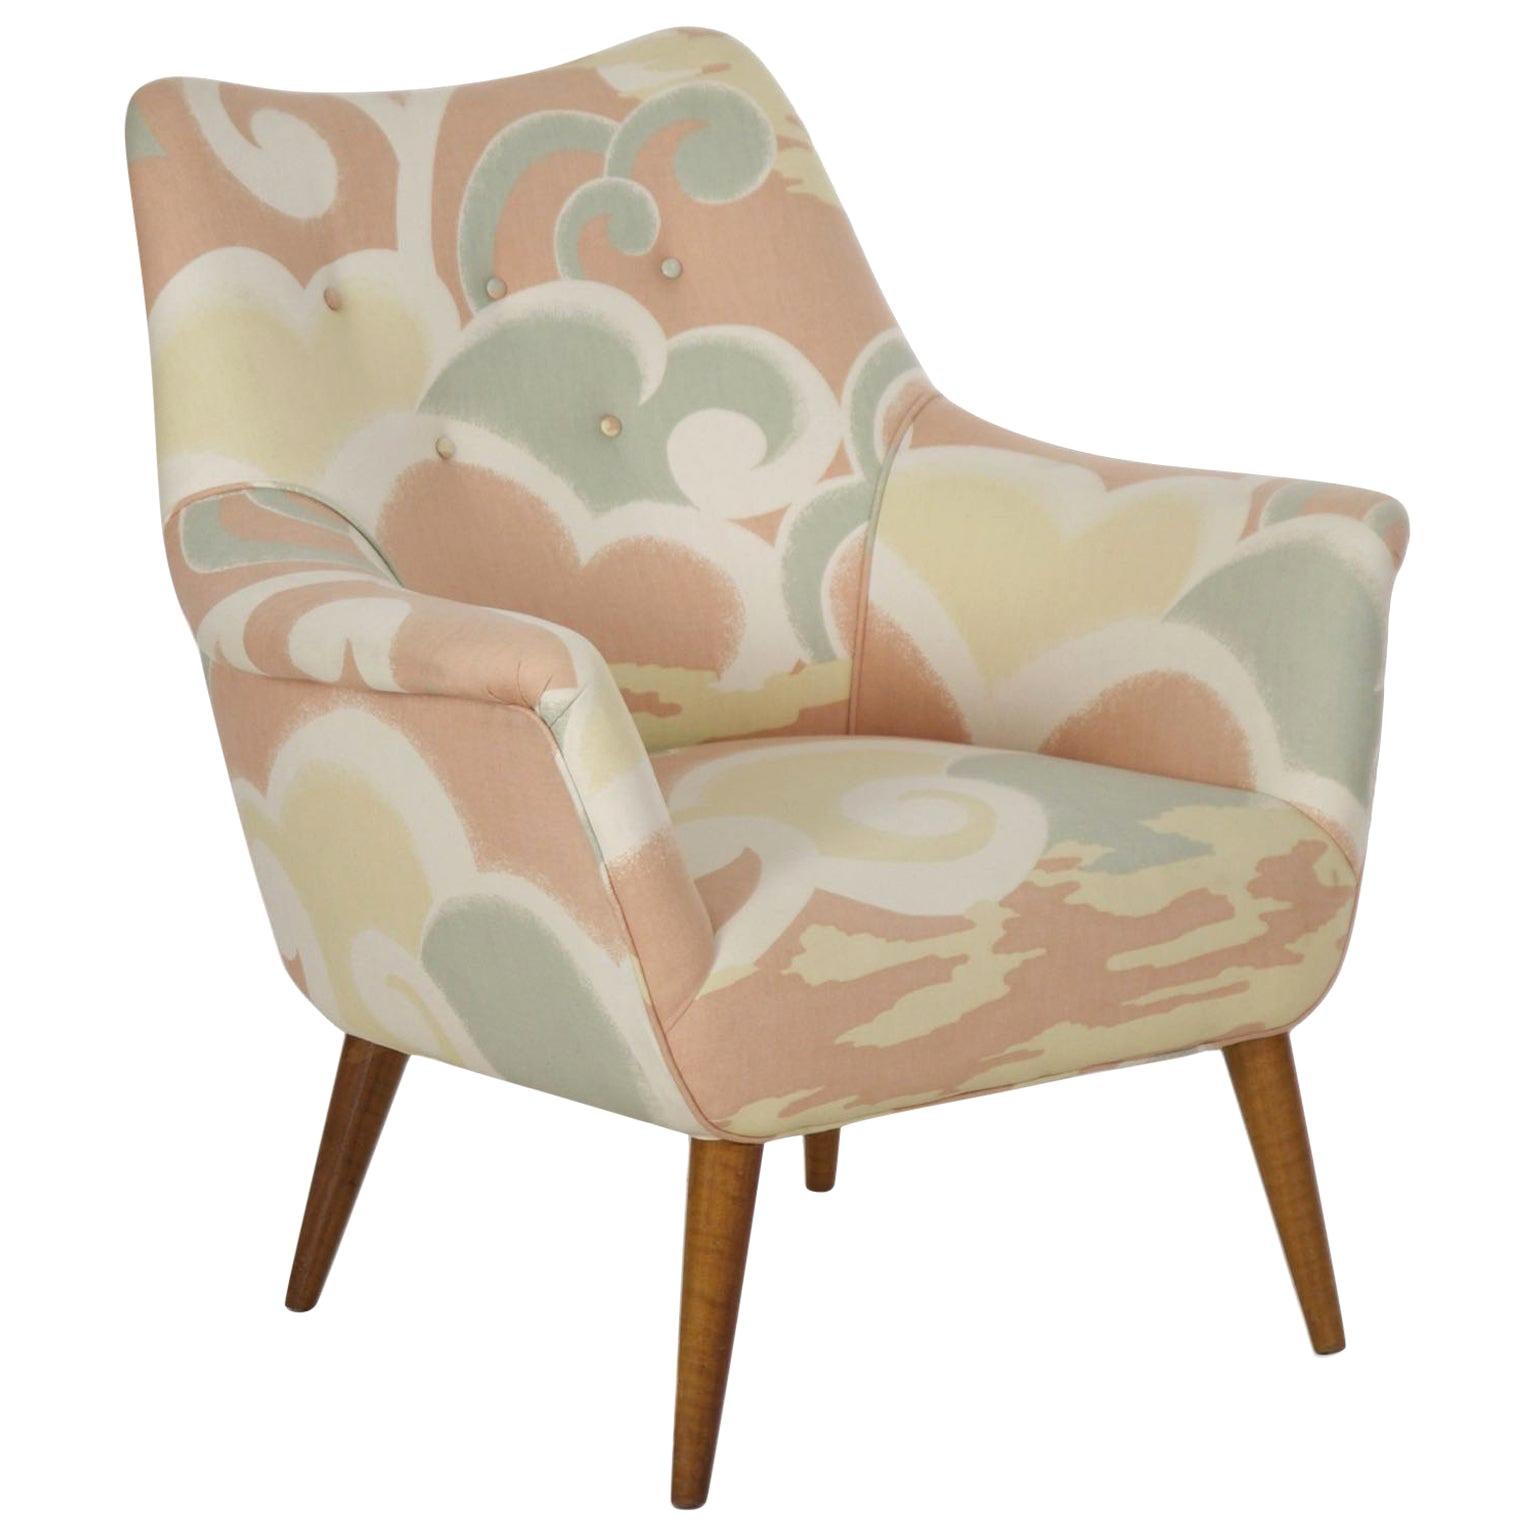 Mid-Century Modern Upholstered Armchair with Splayed Maple Legs, circa 1960s